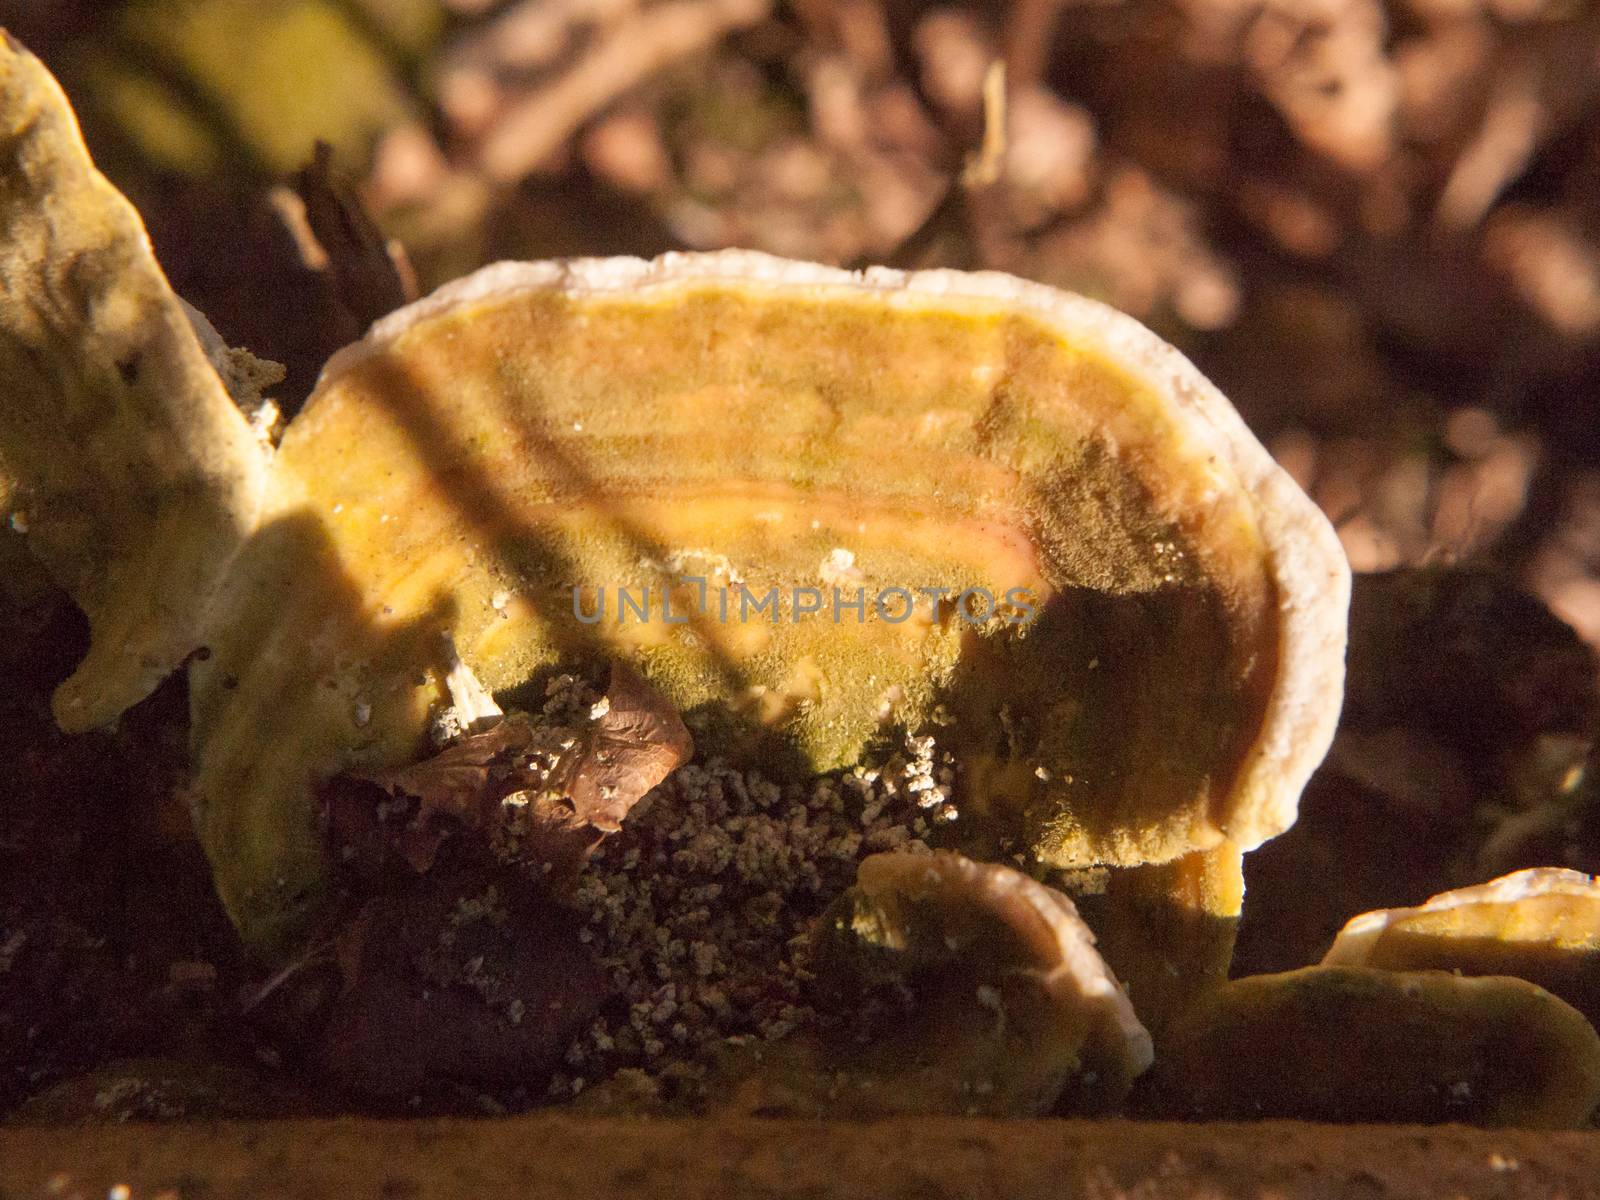 white bracket fungus old rotten growing on dead tree stump close by callumrc